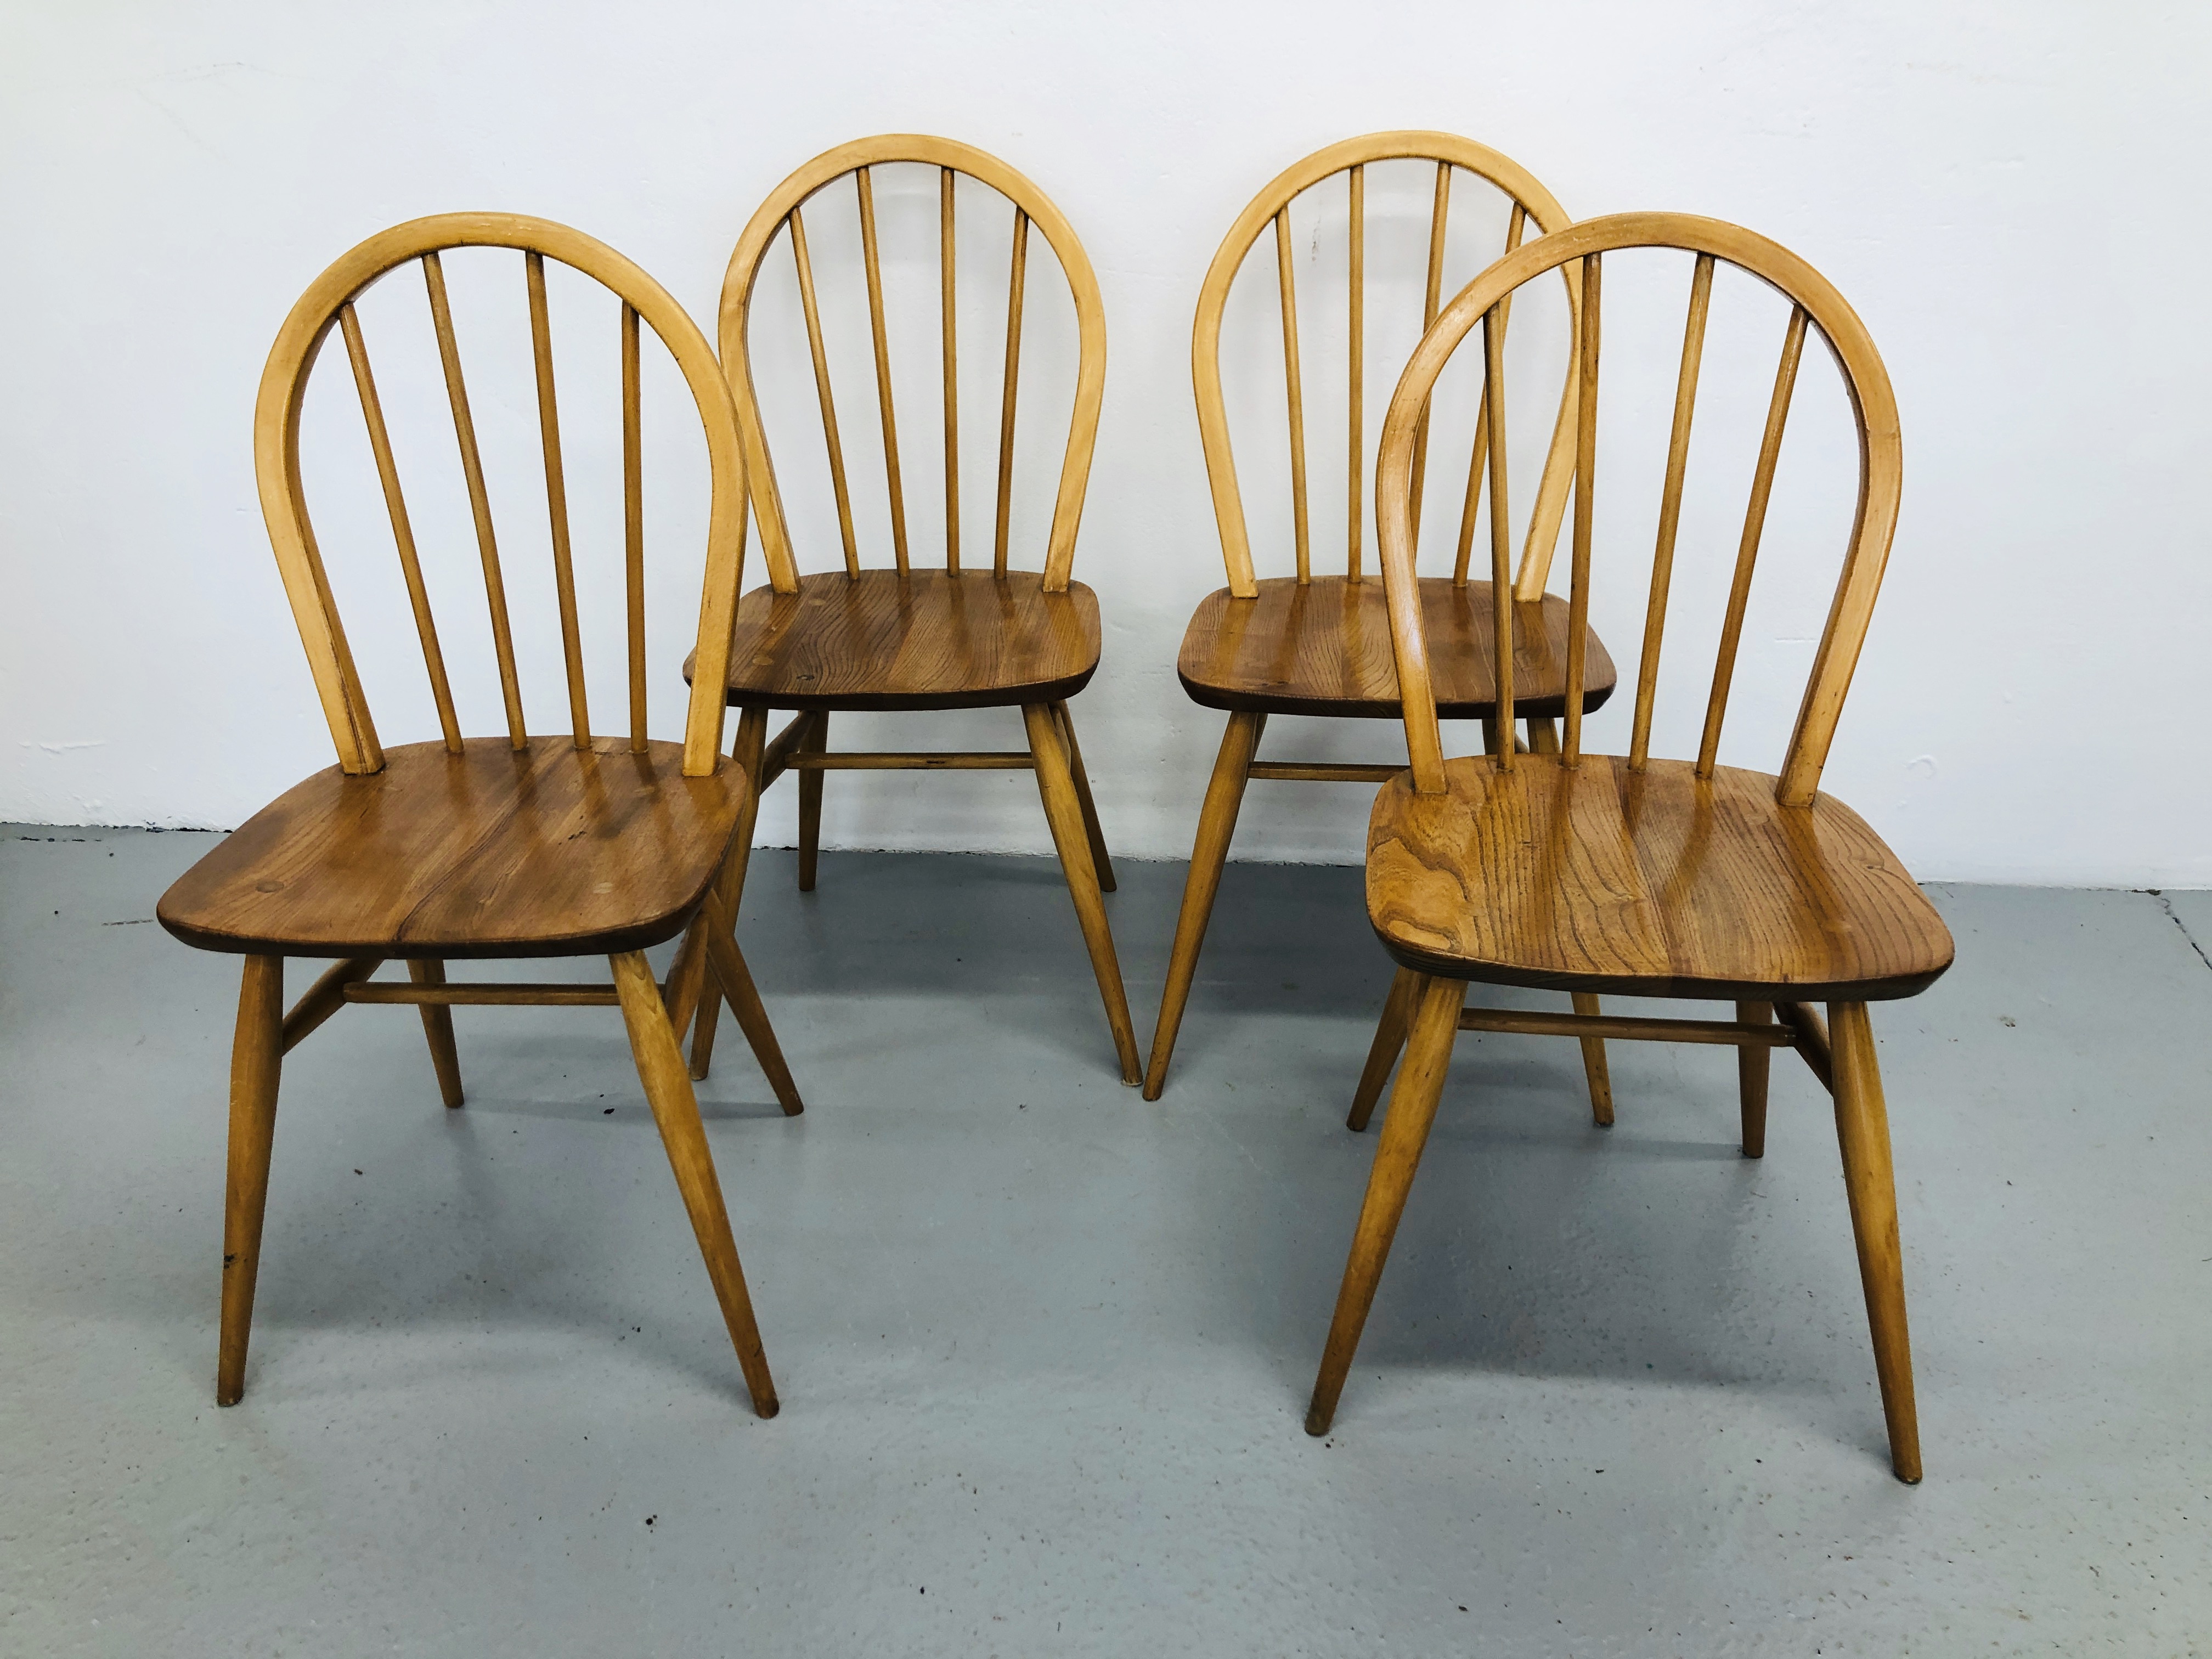 ERCOL DROP FLAP DINING TABLE AND FOUR ERCOL DINING CHAIRS - Image 4 of 4